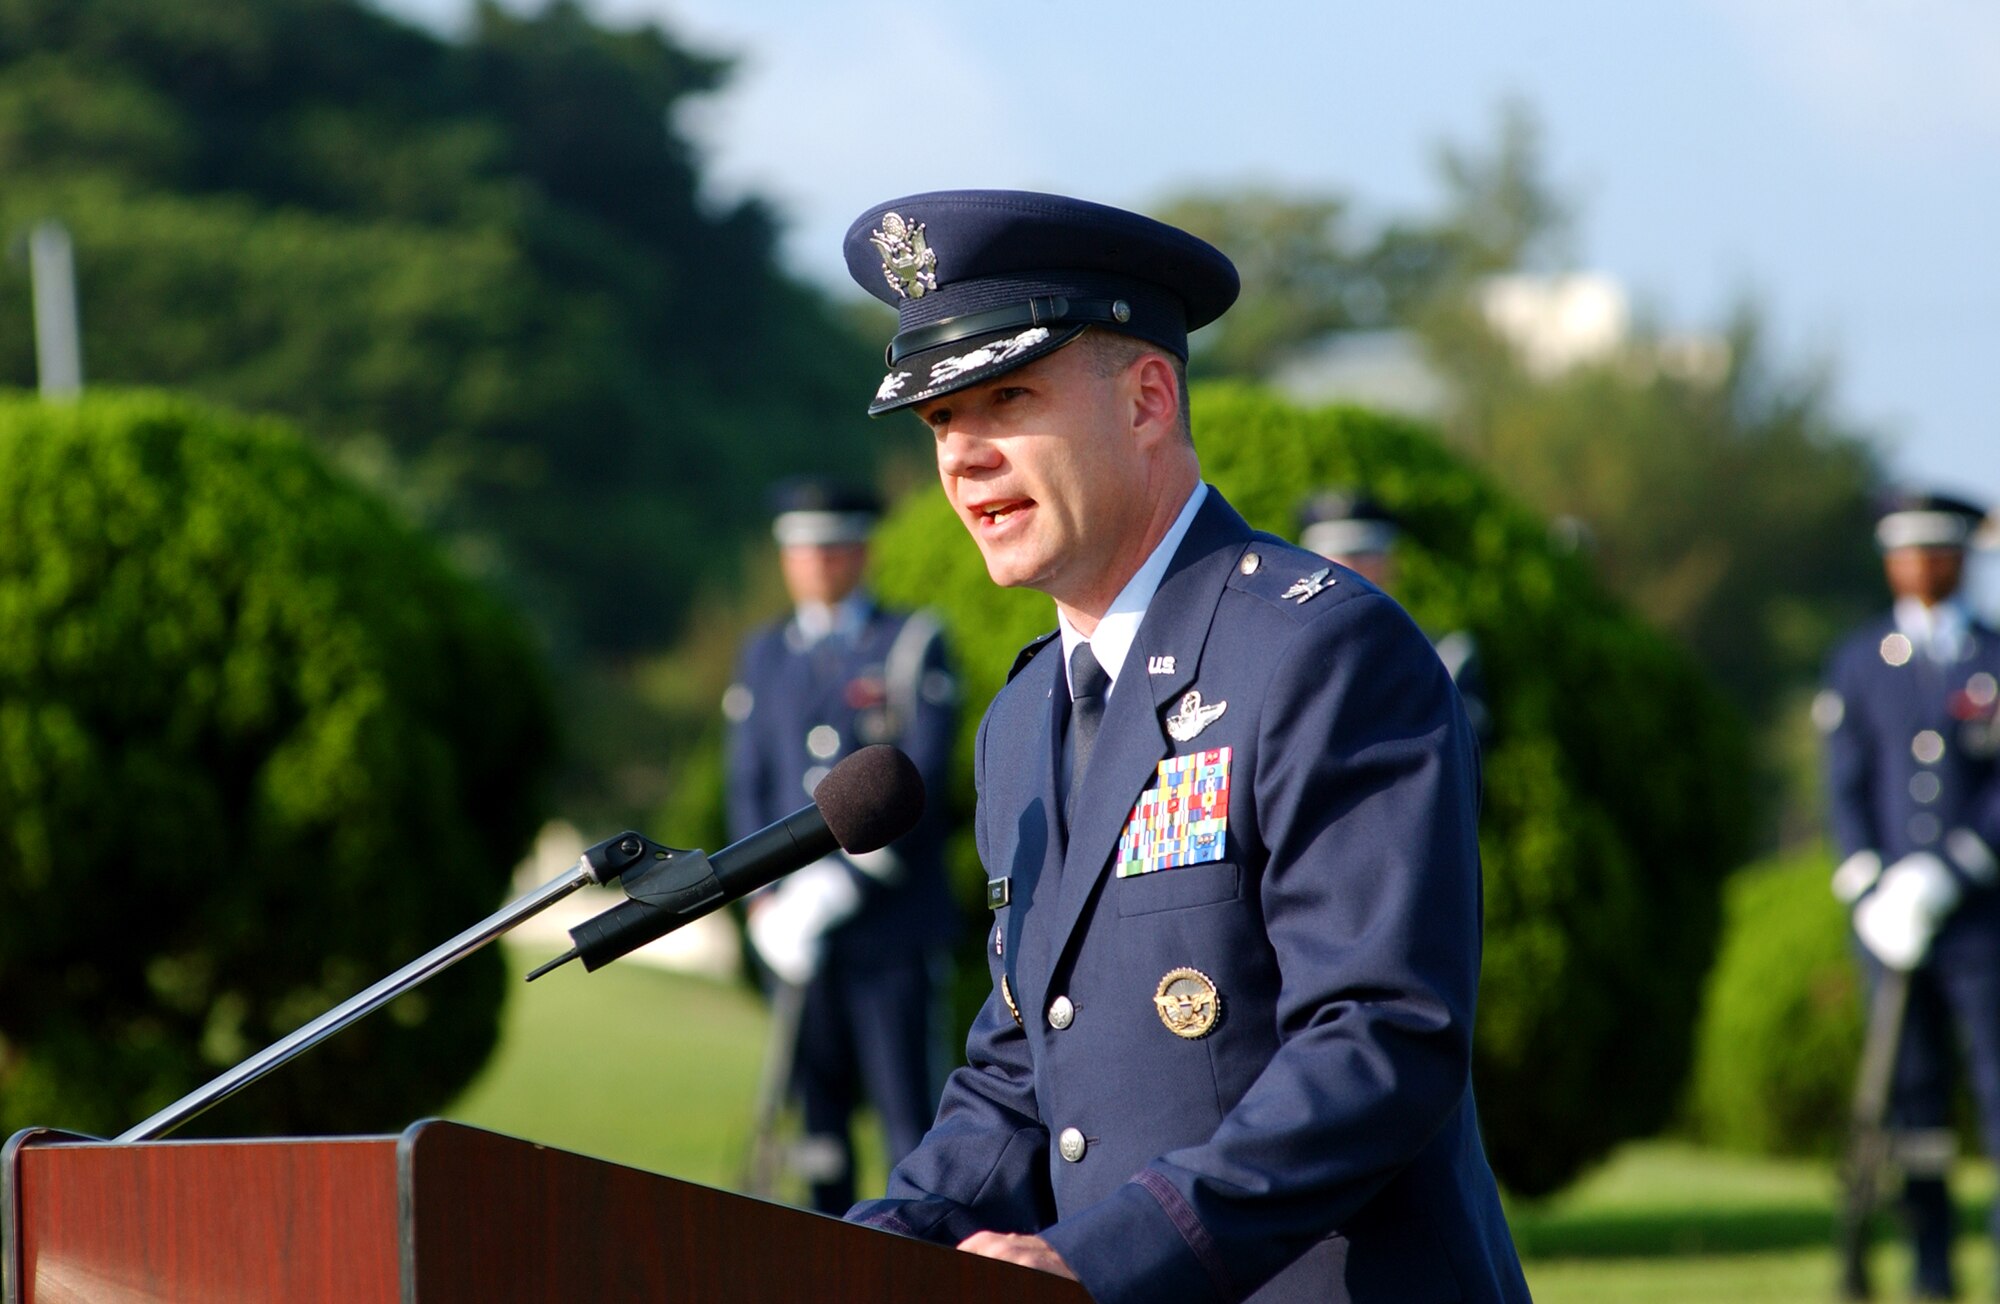 Col. Manson O. Morris, 18th Wing vice commander, gives his final remarks during a Memorial Day ceremony at Kadena Air Base, Japan, May 26. Veterans and military members from all four branches of the military attended the event to remember those who died in our nation's service.
(U.S. Air Force photo/Tech. Sgt. Rey Ramon)